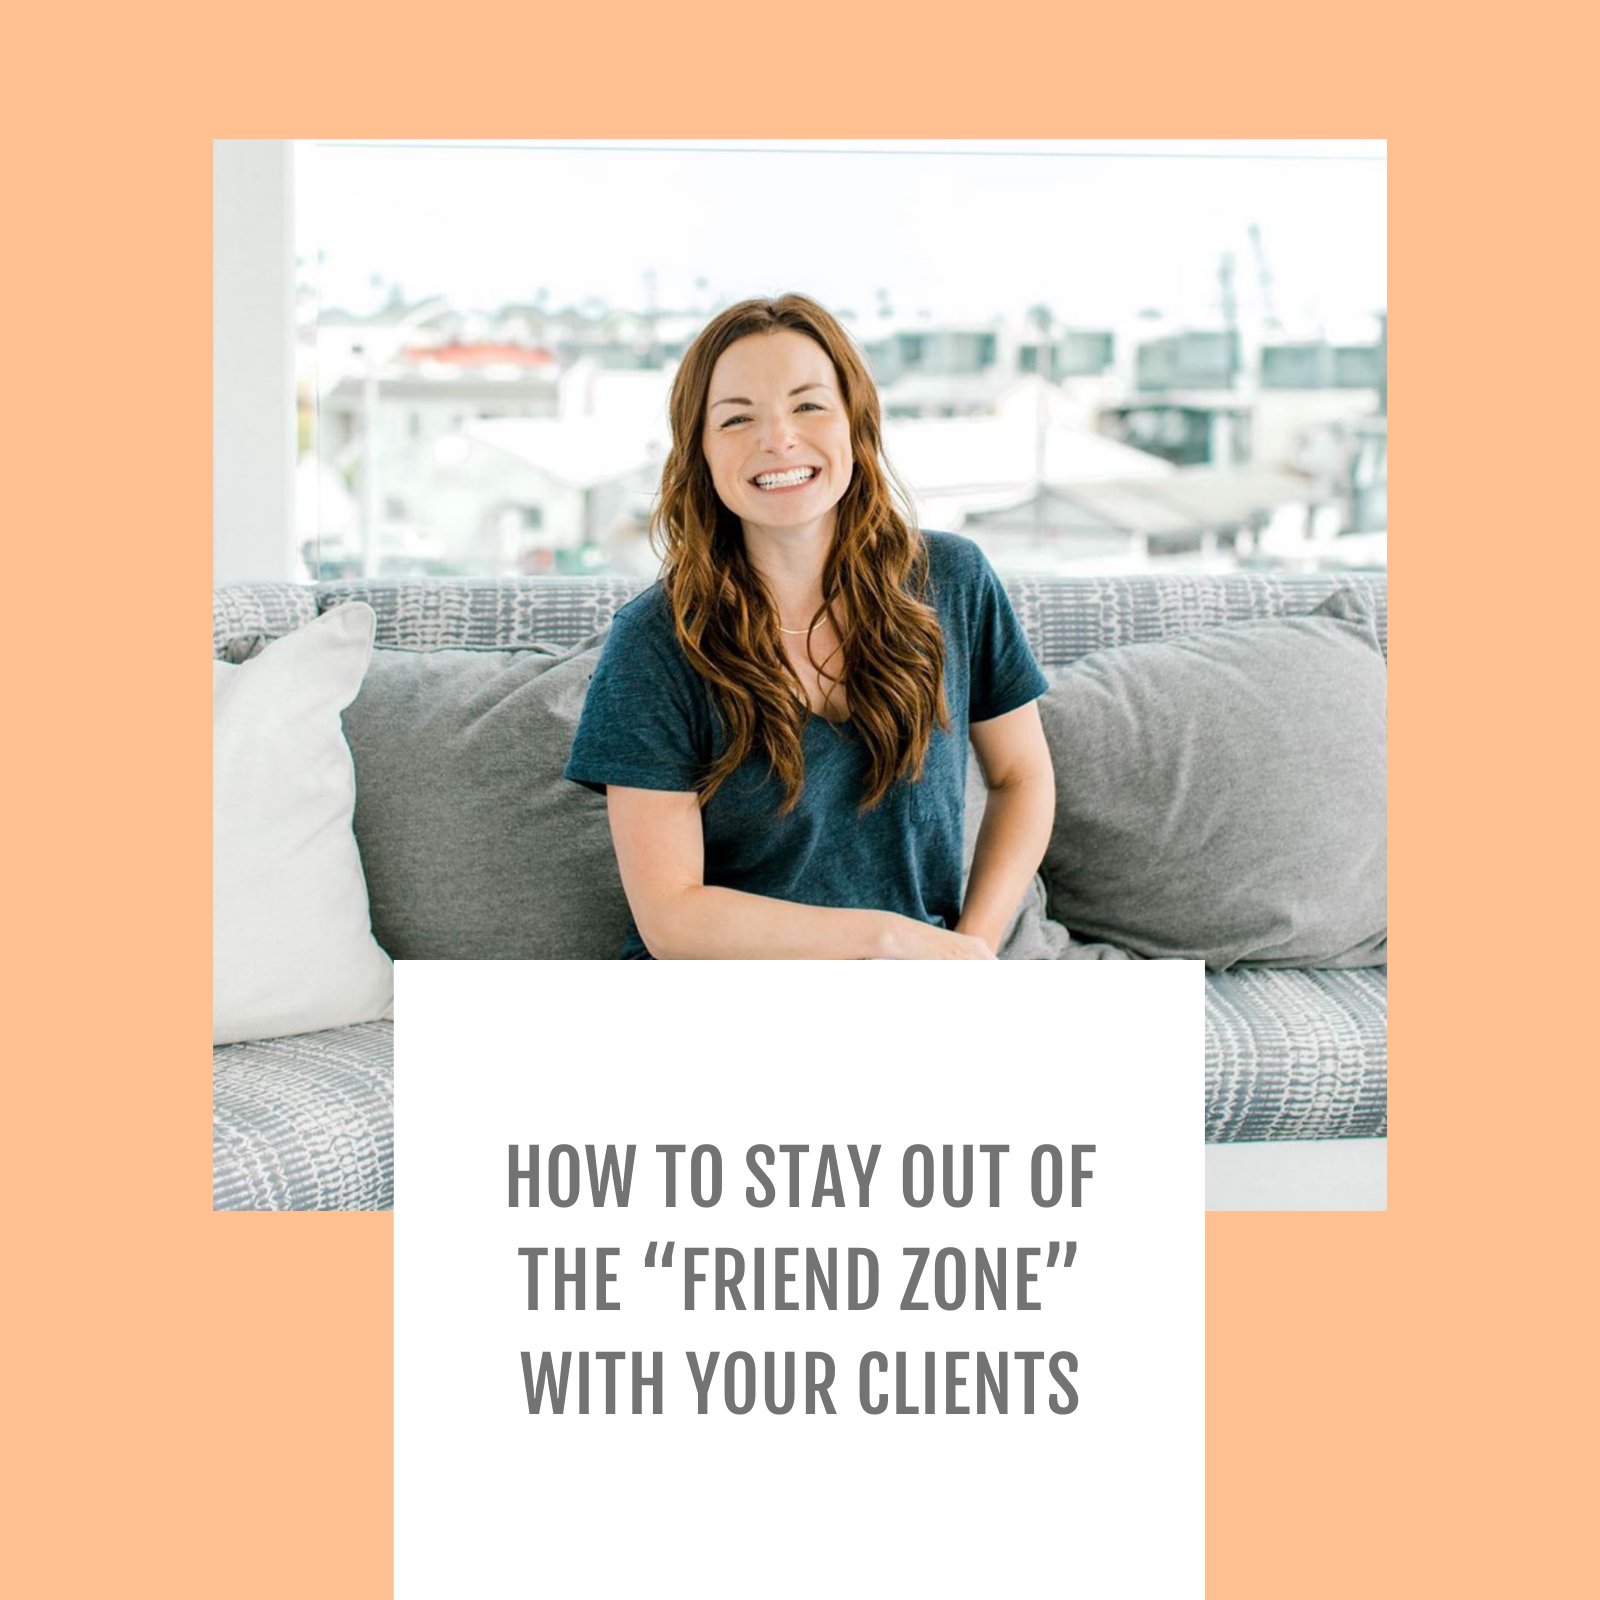 Episode #060 How to stay out of the “friend zone” with your clients